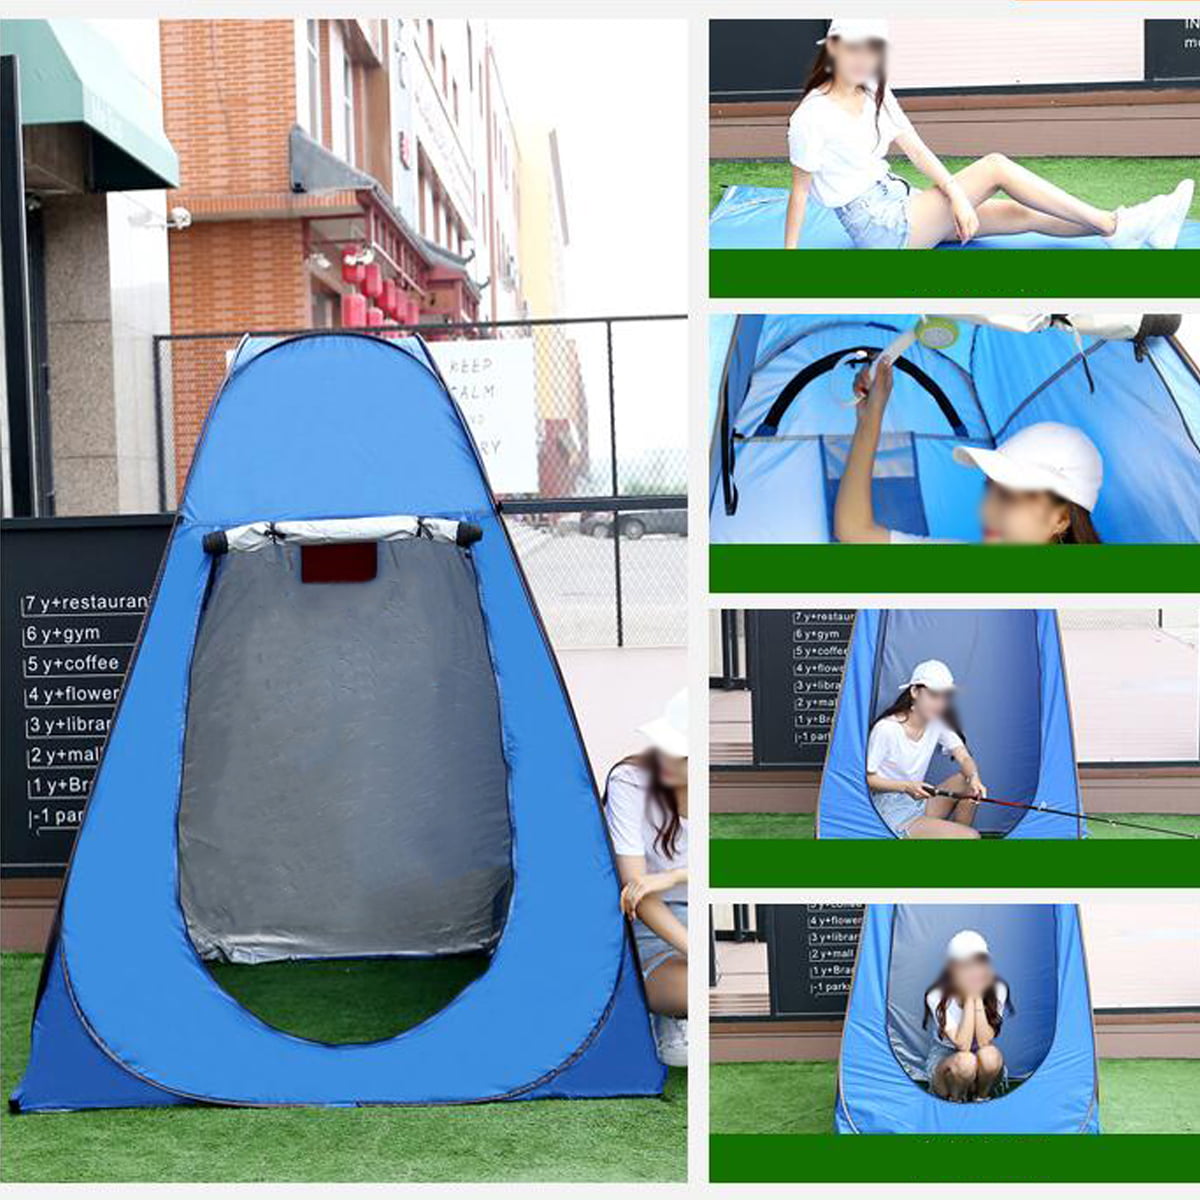 Pop Up Privacy Tent Portable Shower Station Changing Room Camp Beach 6 COLORS